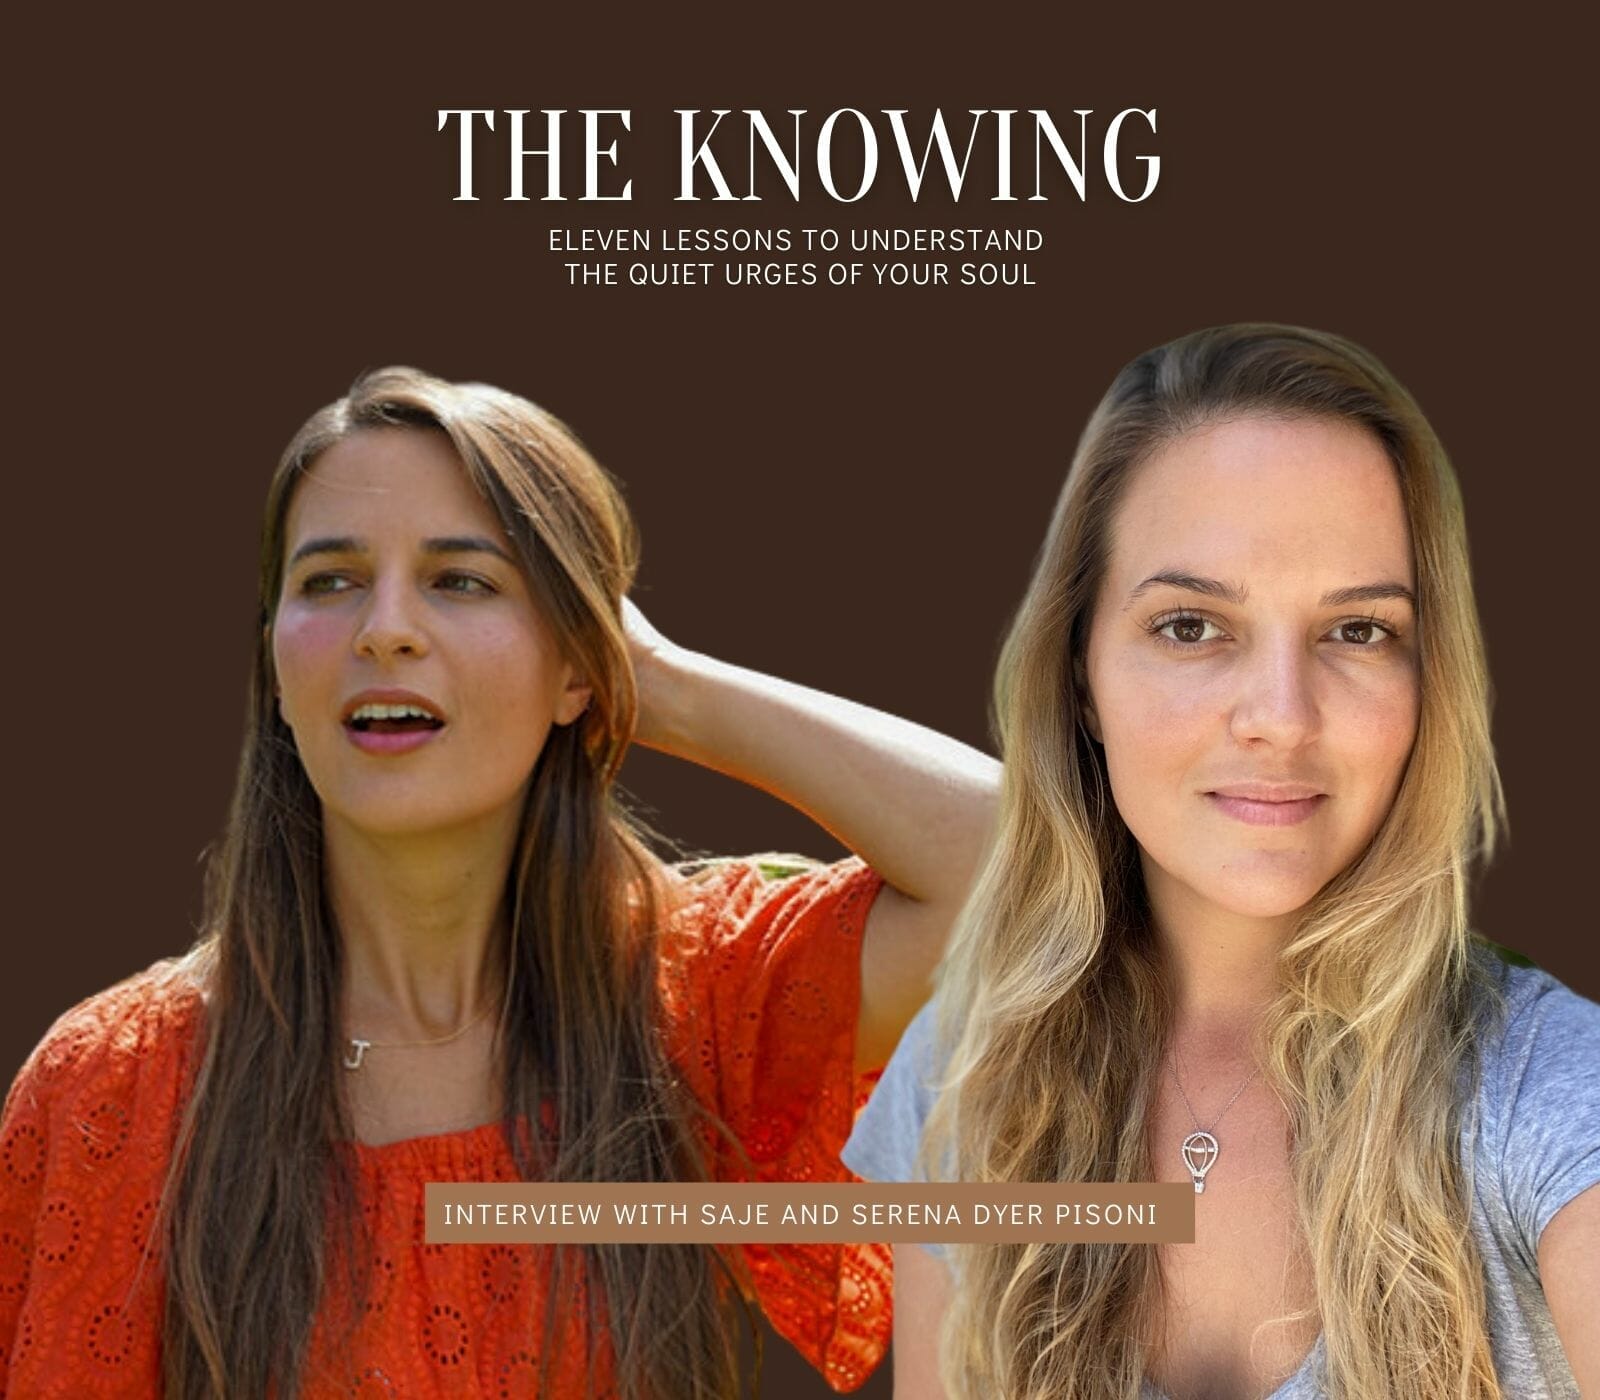 The Knowing: 11 Lessons to Understand the Quiet Urges of Your Soul  (Paperback)